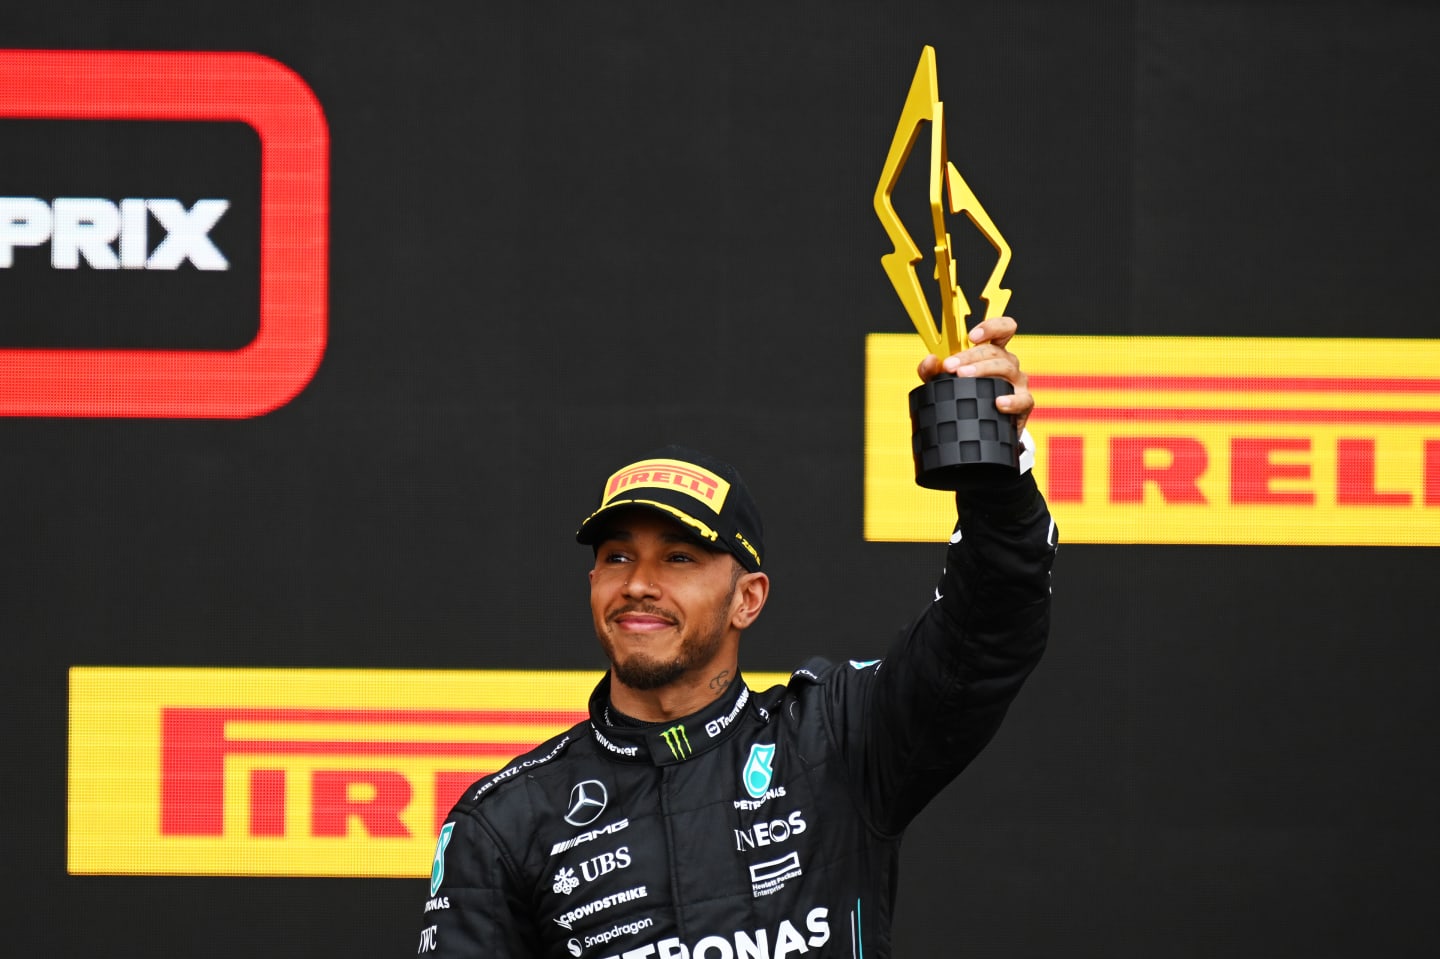 MONTREAL, QUEBEC - JUNE 18: Third placed Lewis Hamilton of Great Britain and Mercedes celebrates on